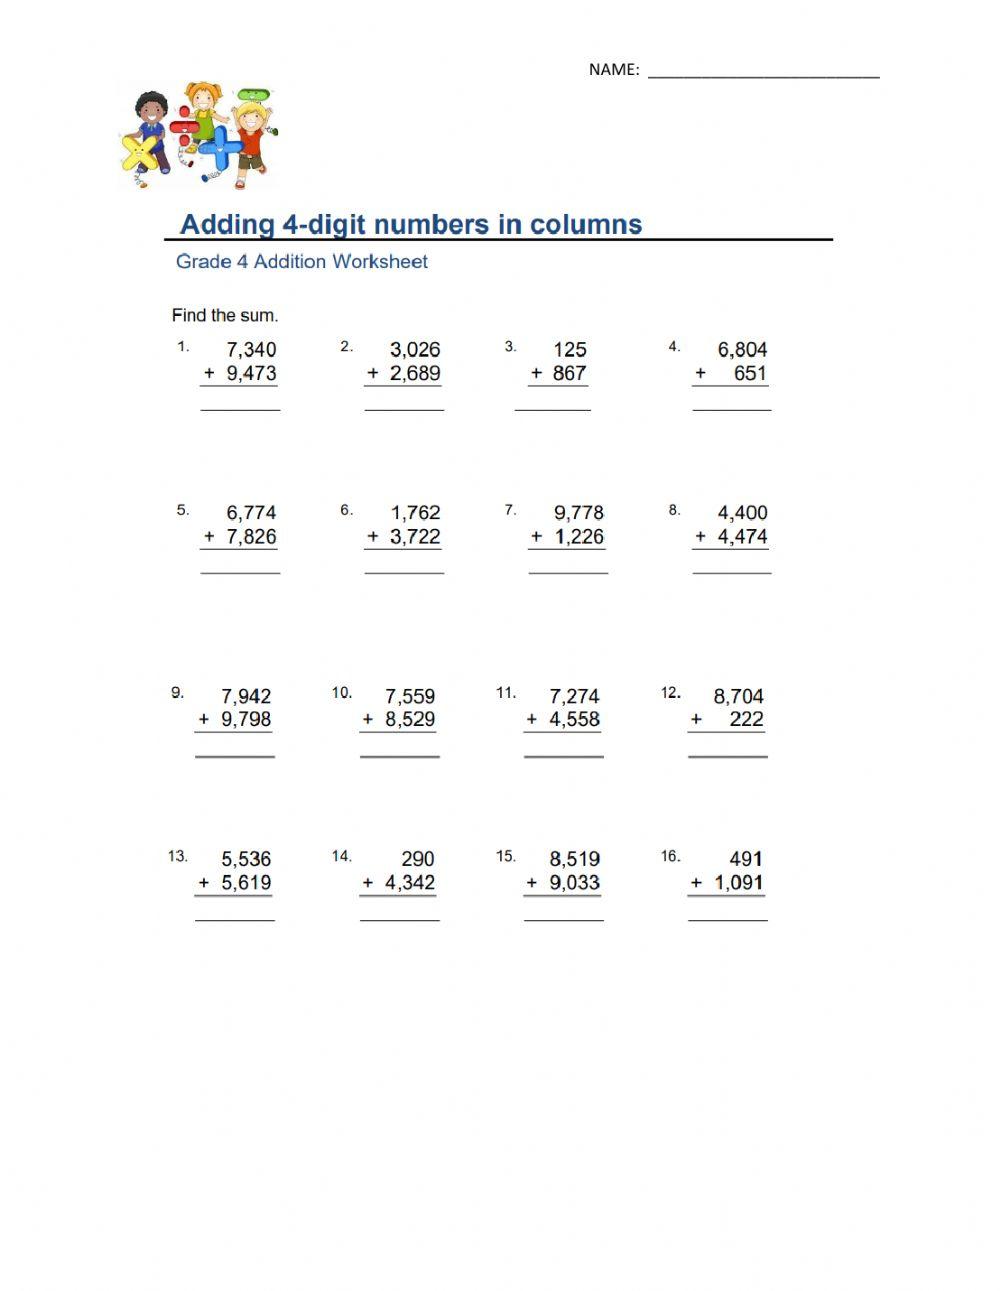 Adding 4-digit Numbers in Columns